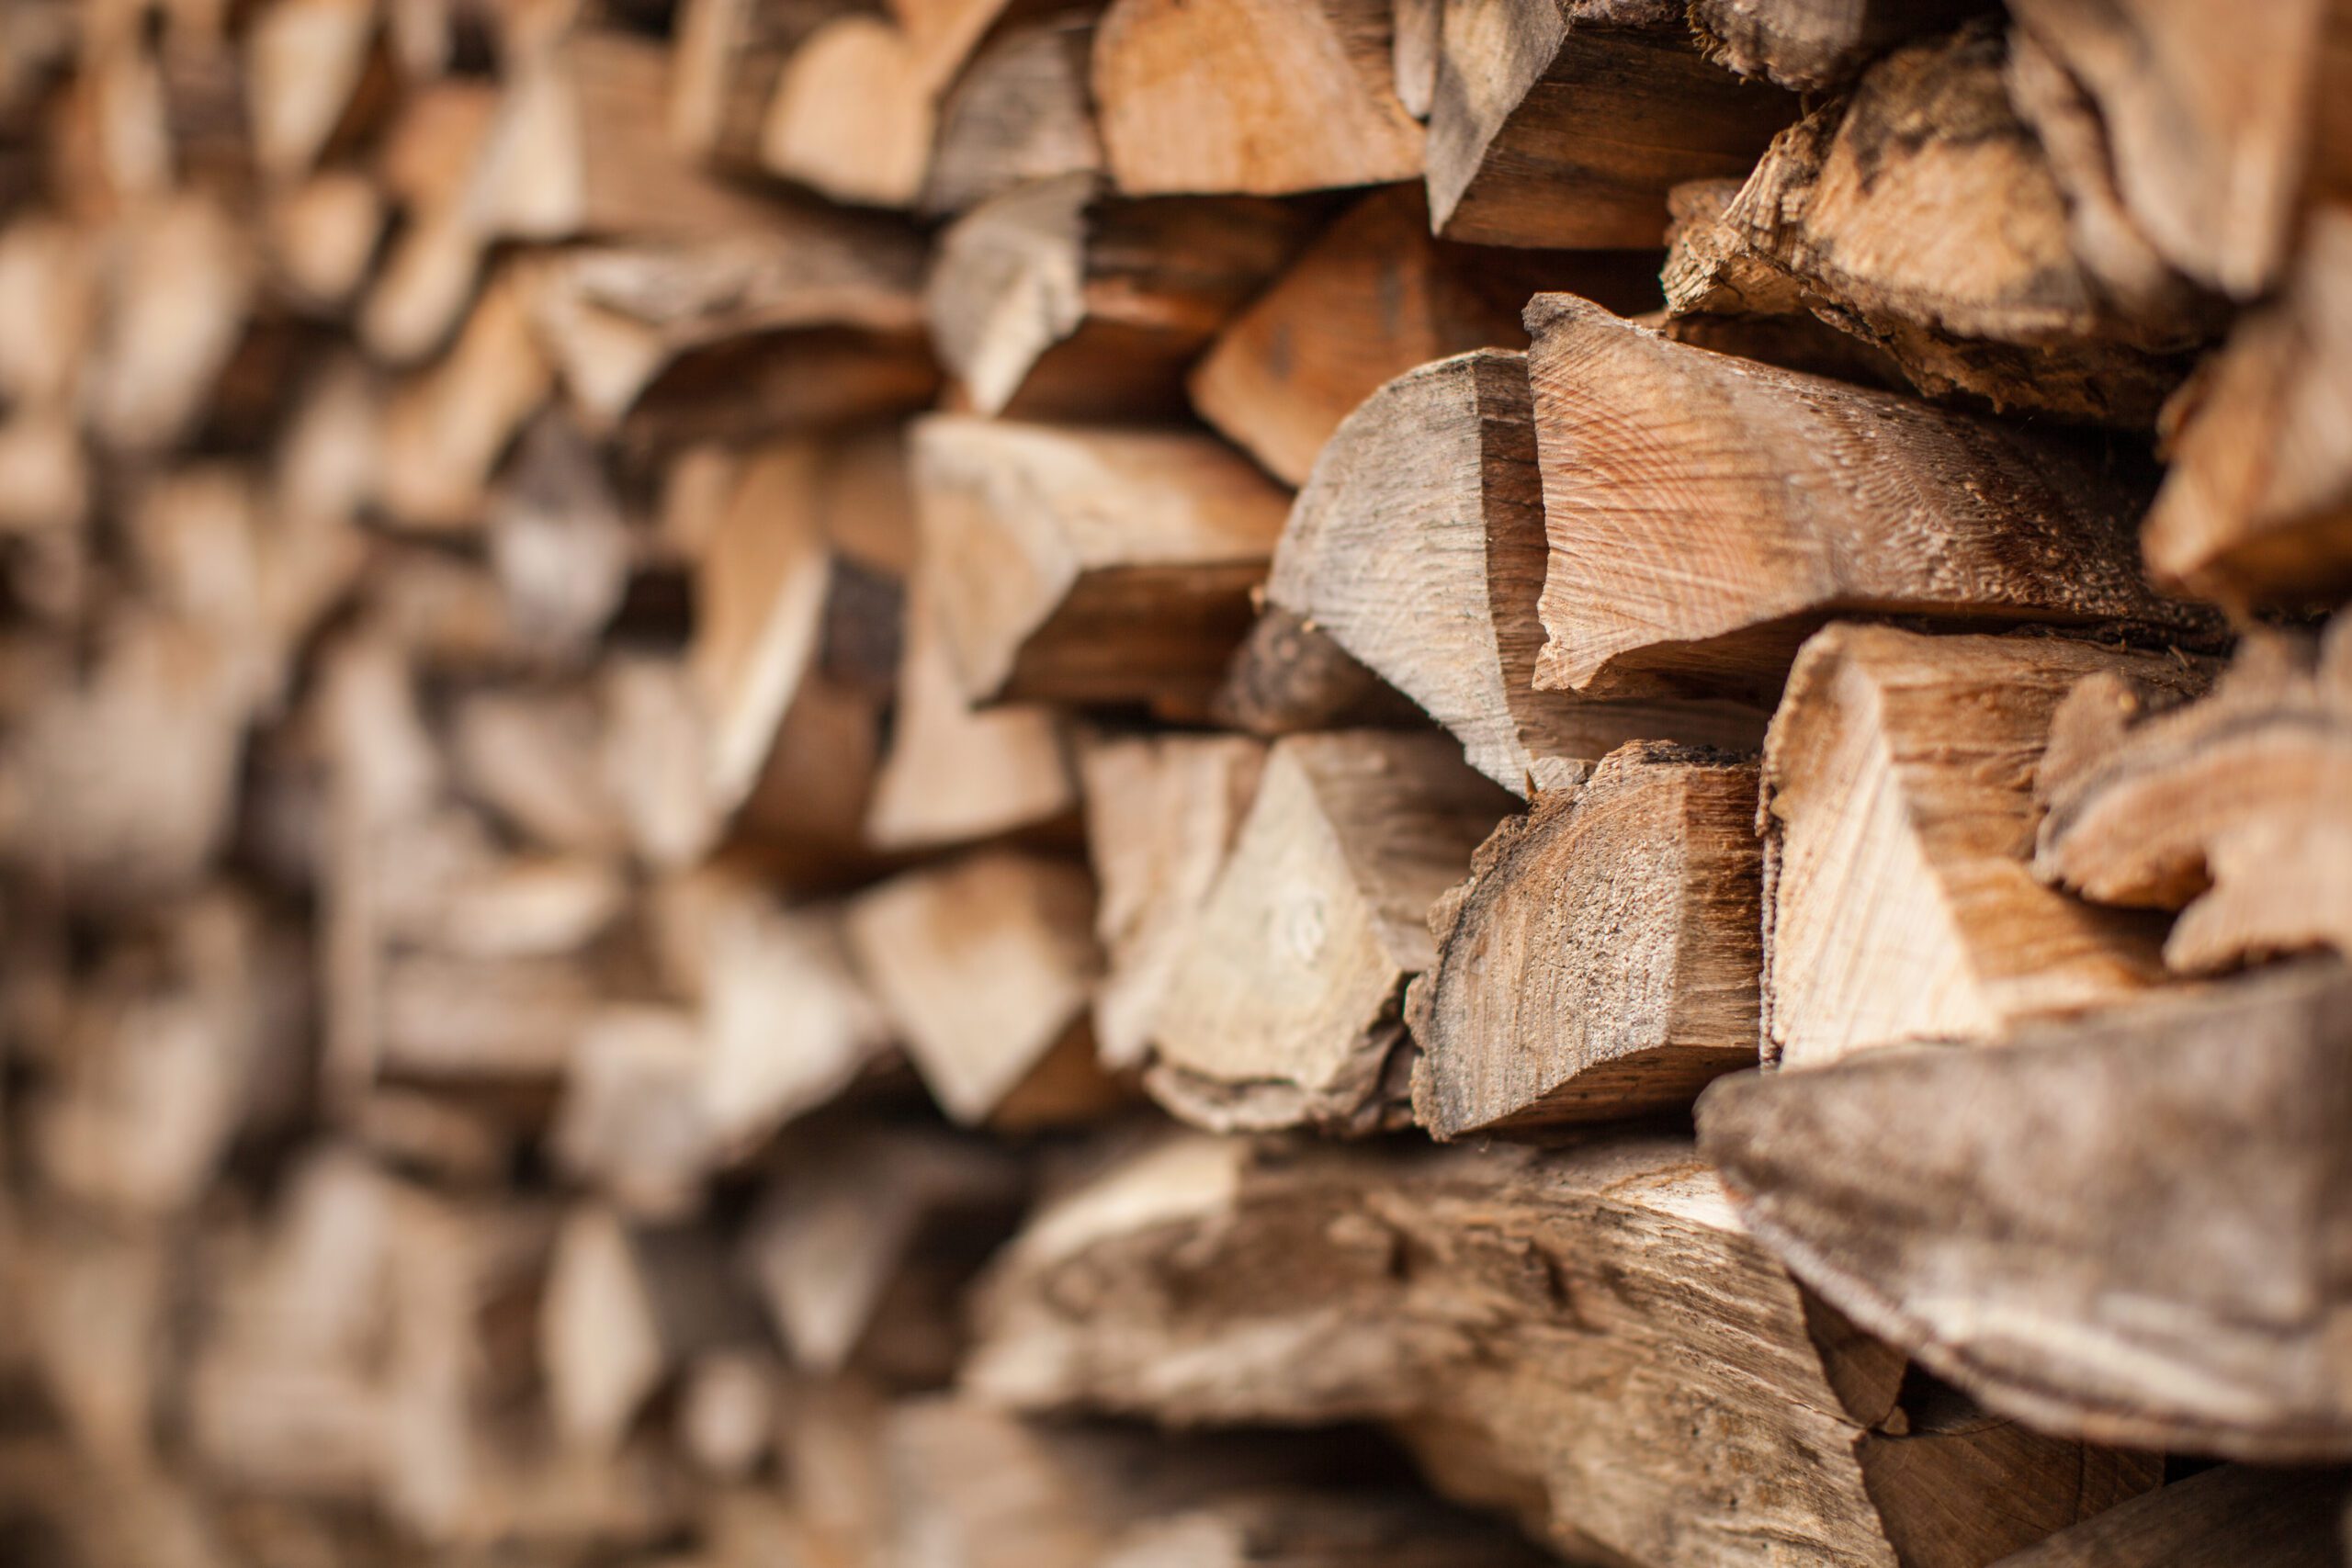 A photo of a stack of firewood where a few pieces of wood are focused and the rest of the pieces are unfocused